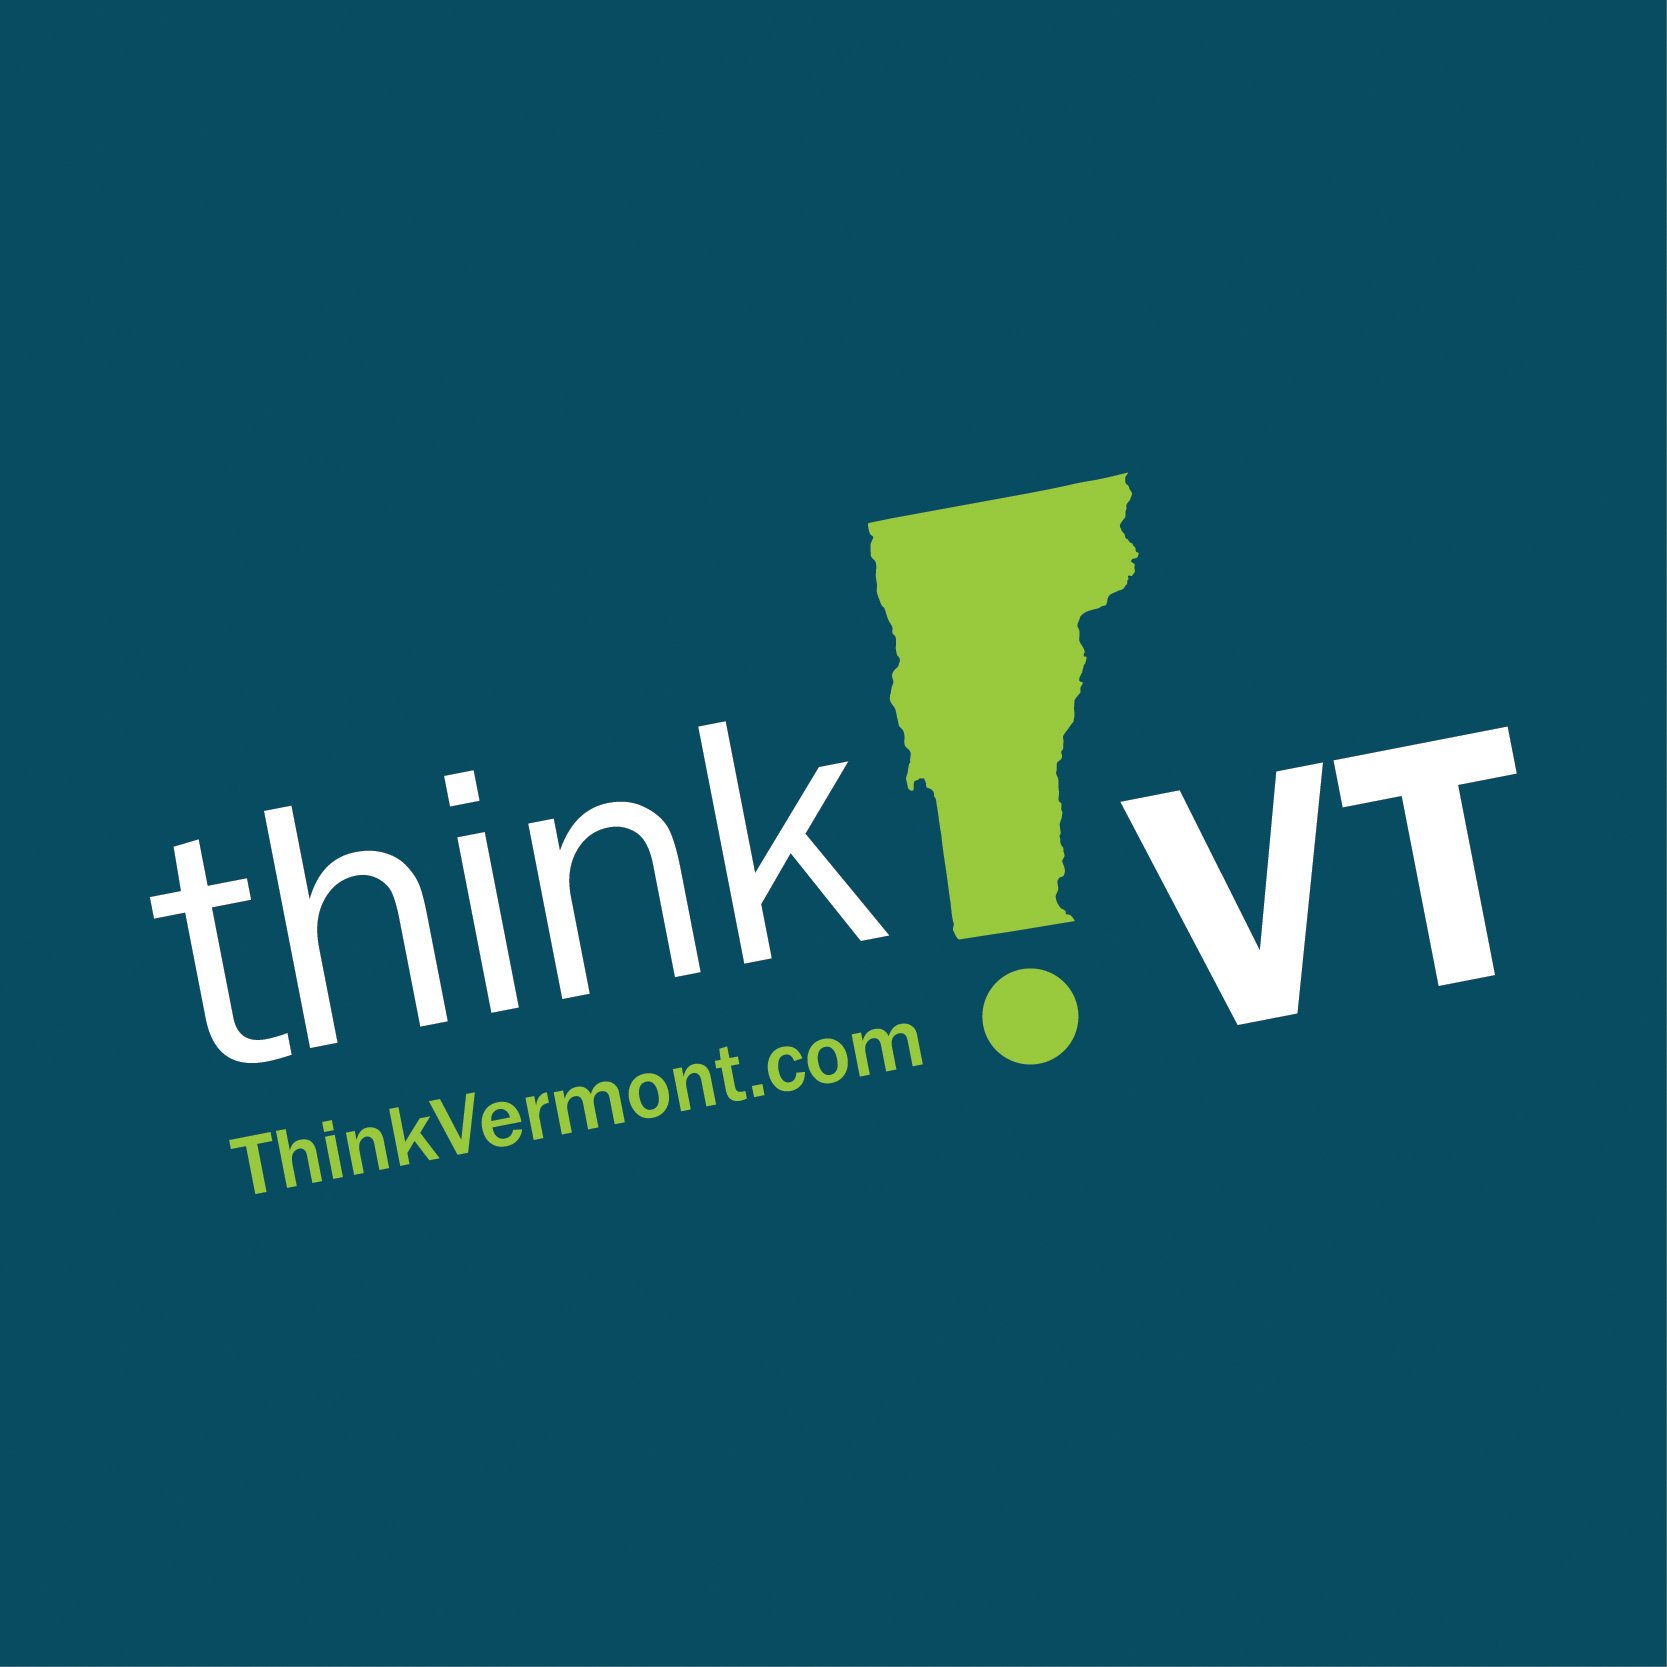 ThinkVTJobs features open positions posted by Vermont employers. Open a tweet and follow these companies to learn more and connect with a potential employer.